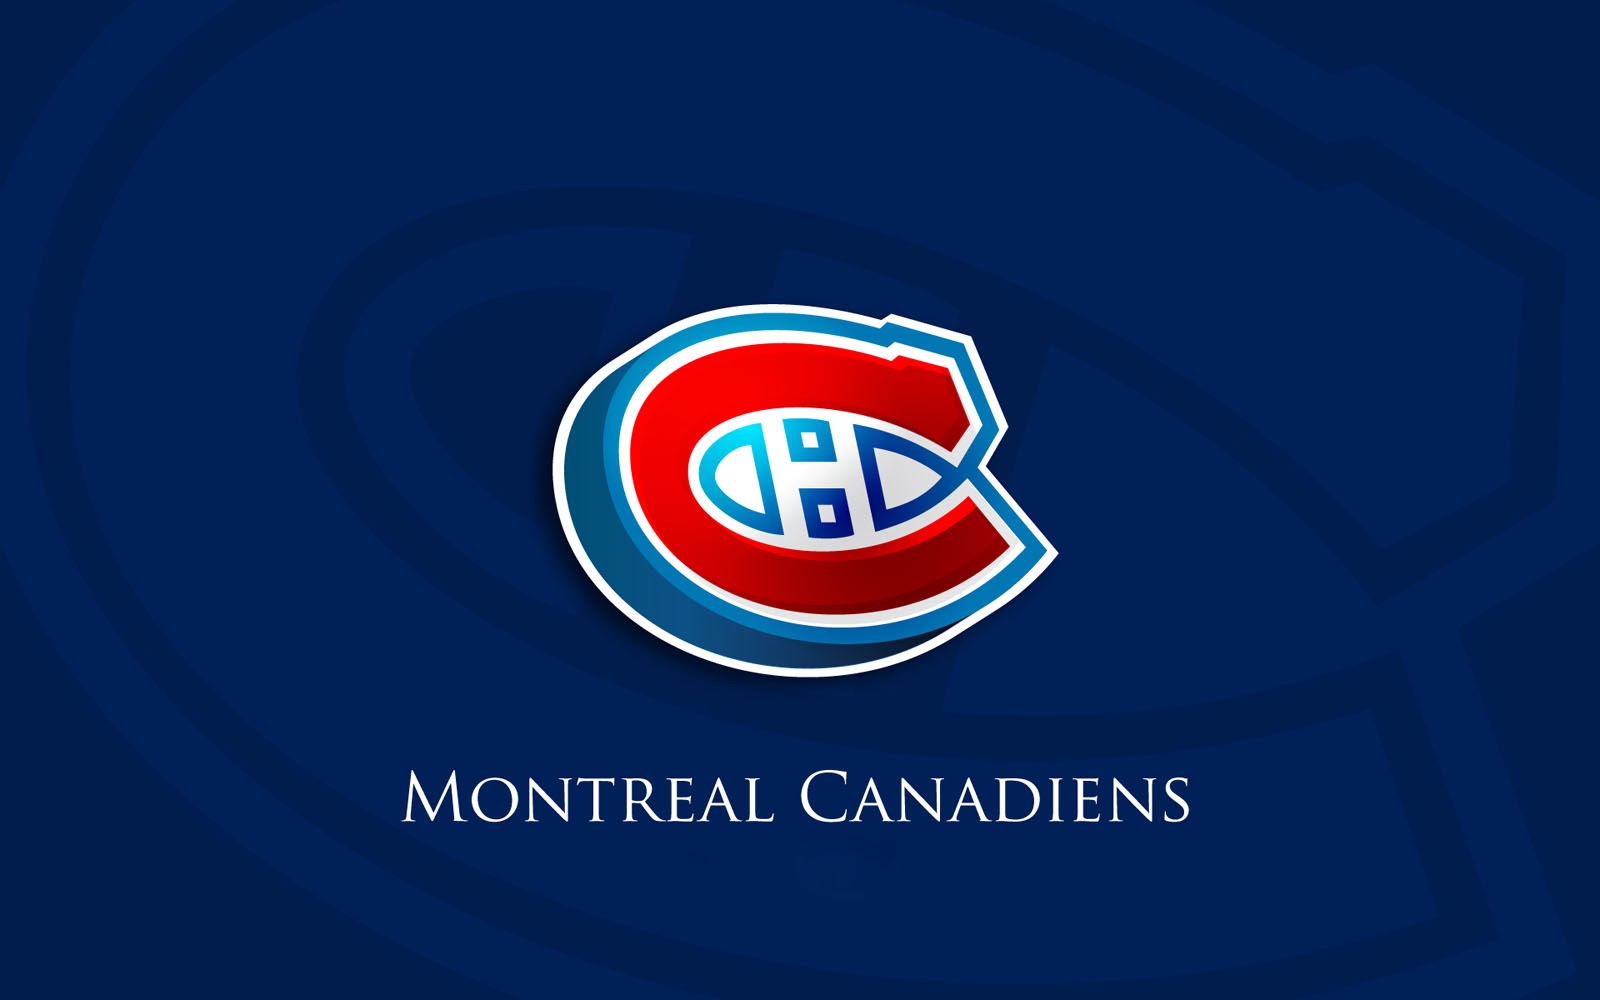 Tag Montreal Canadiens Wallpaper Background Photos Image And